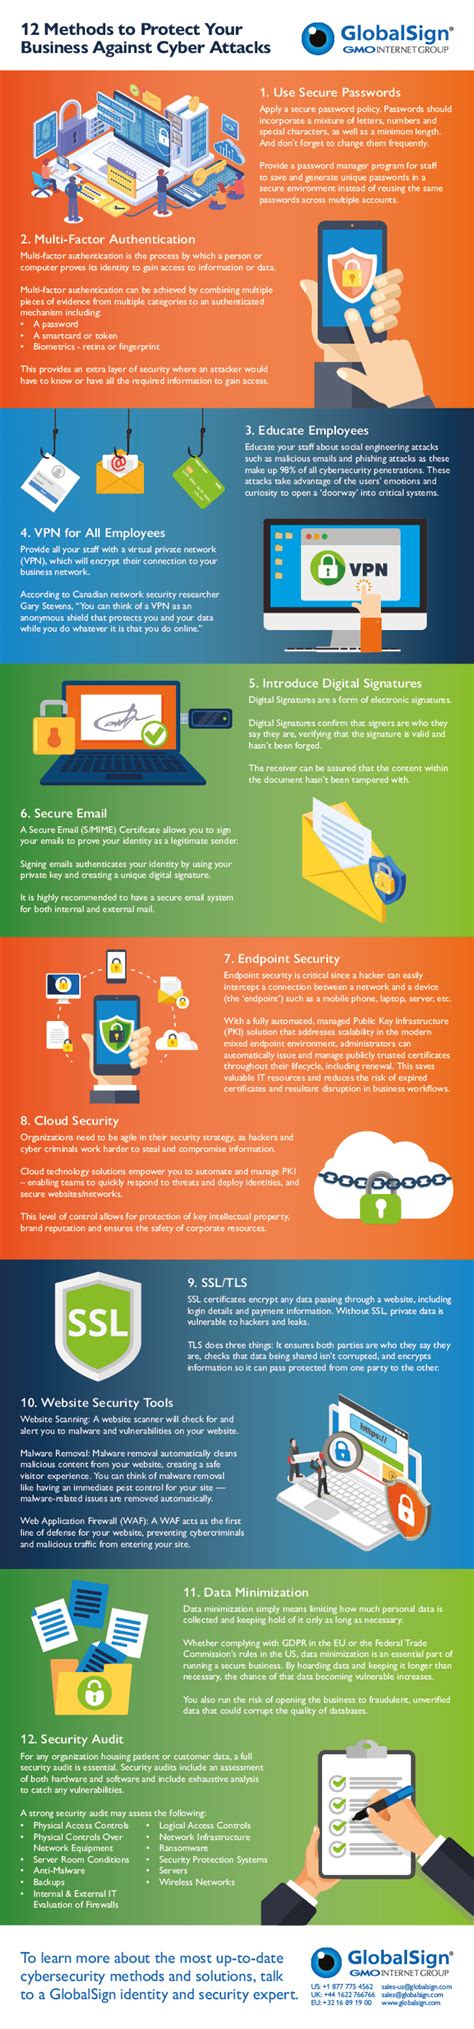 Infographic 12 Methods To Protect Your Business Against Cyber Attacks